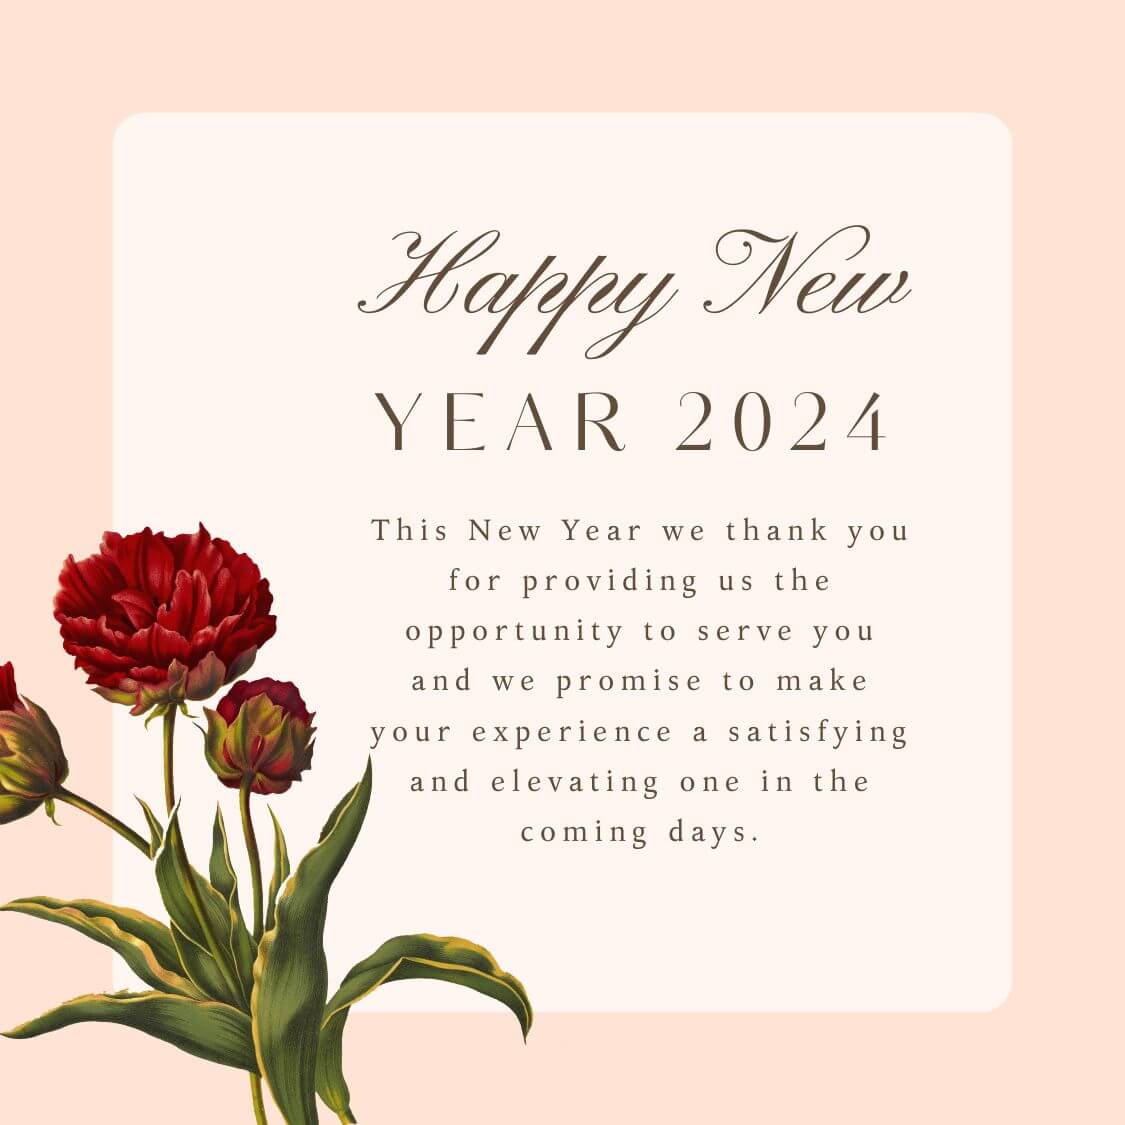 Happy New Year 2024 wishes for customers